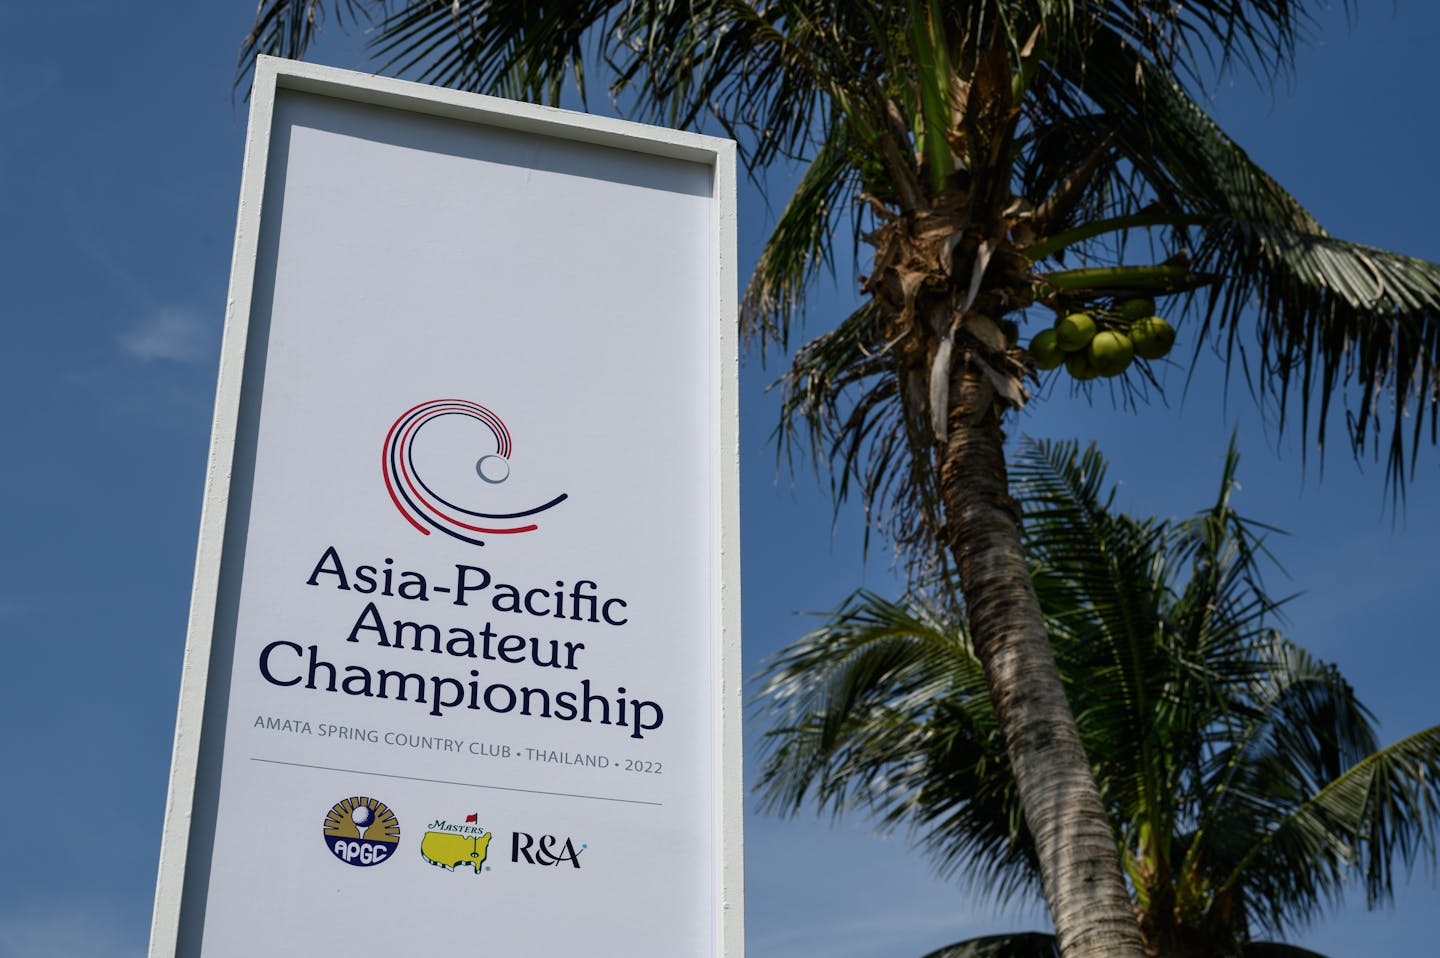 Asia-Pacific Amateur - General view of tournament branding